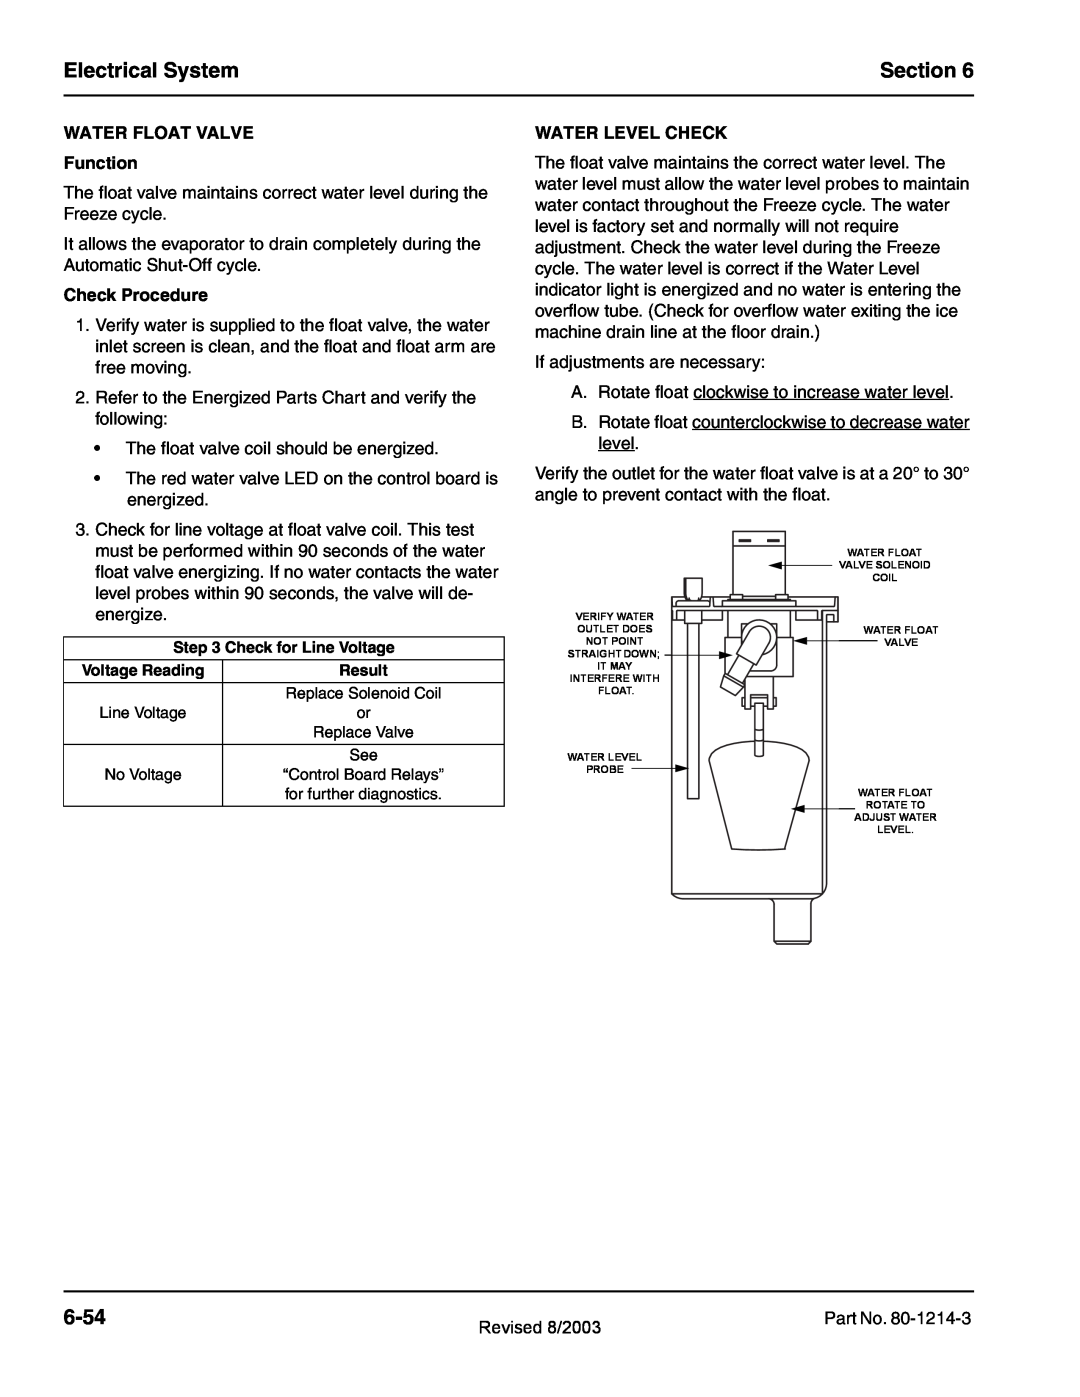 Manitowoc Ice QF0800 Electrical System, Section, 6-54, WATER FLOAT VALVE Function, Check Procedure, Water Level Check 